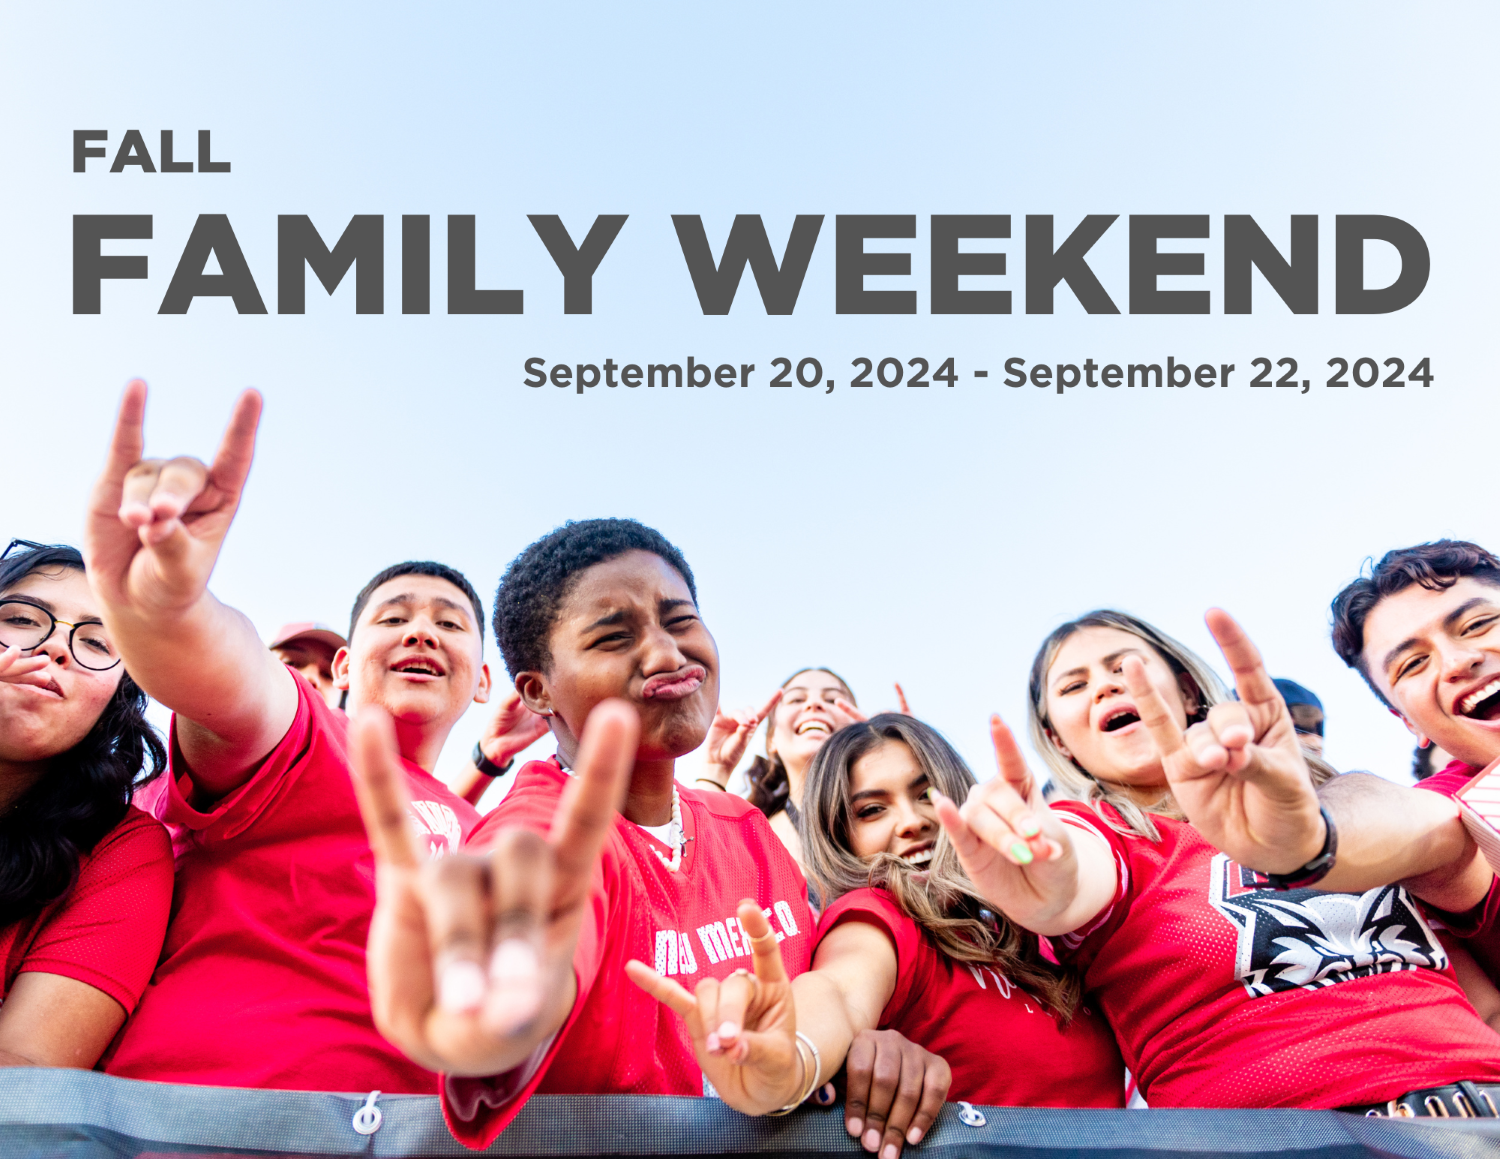 Fall Family Weekend 2024 Save-the-Date